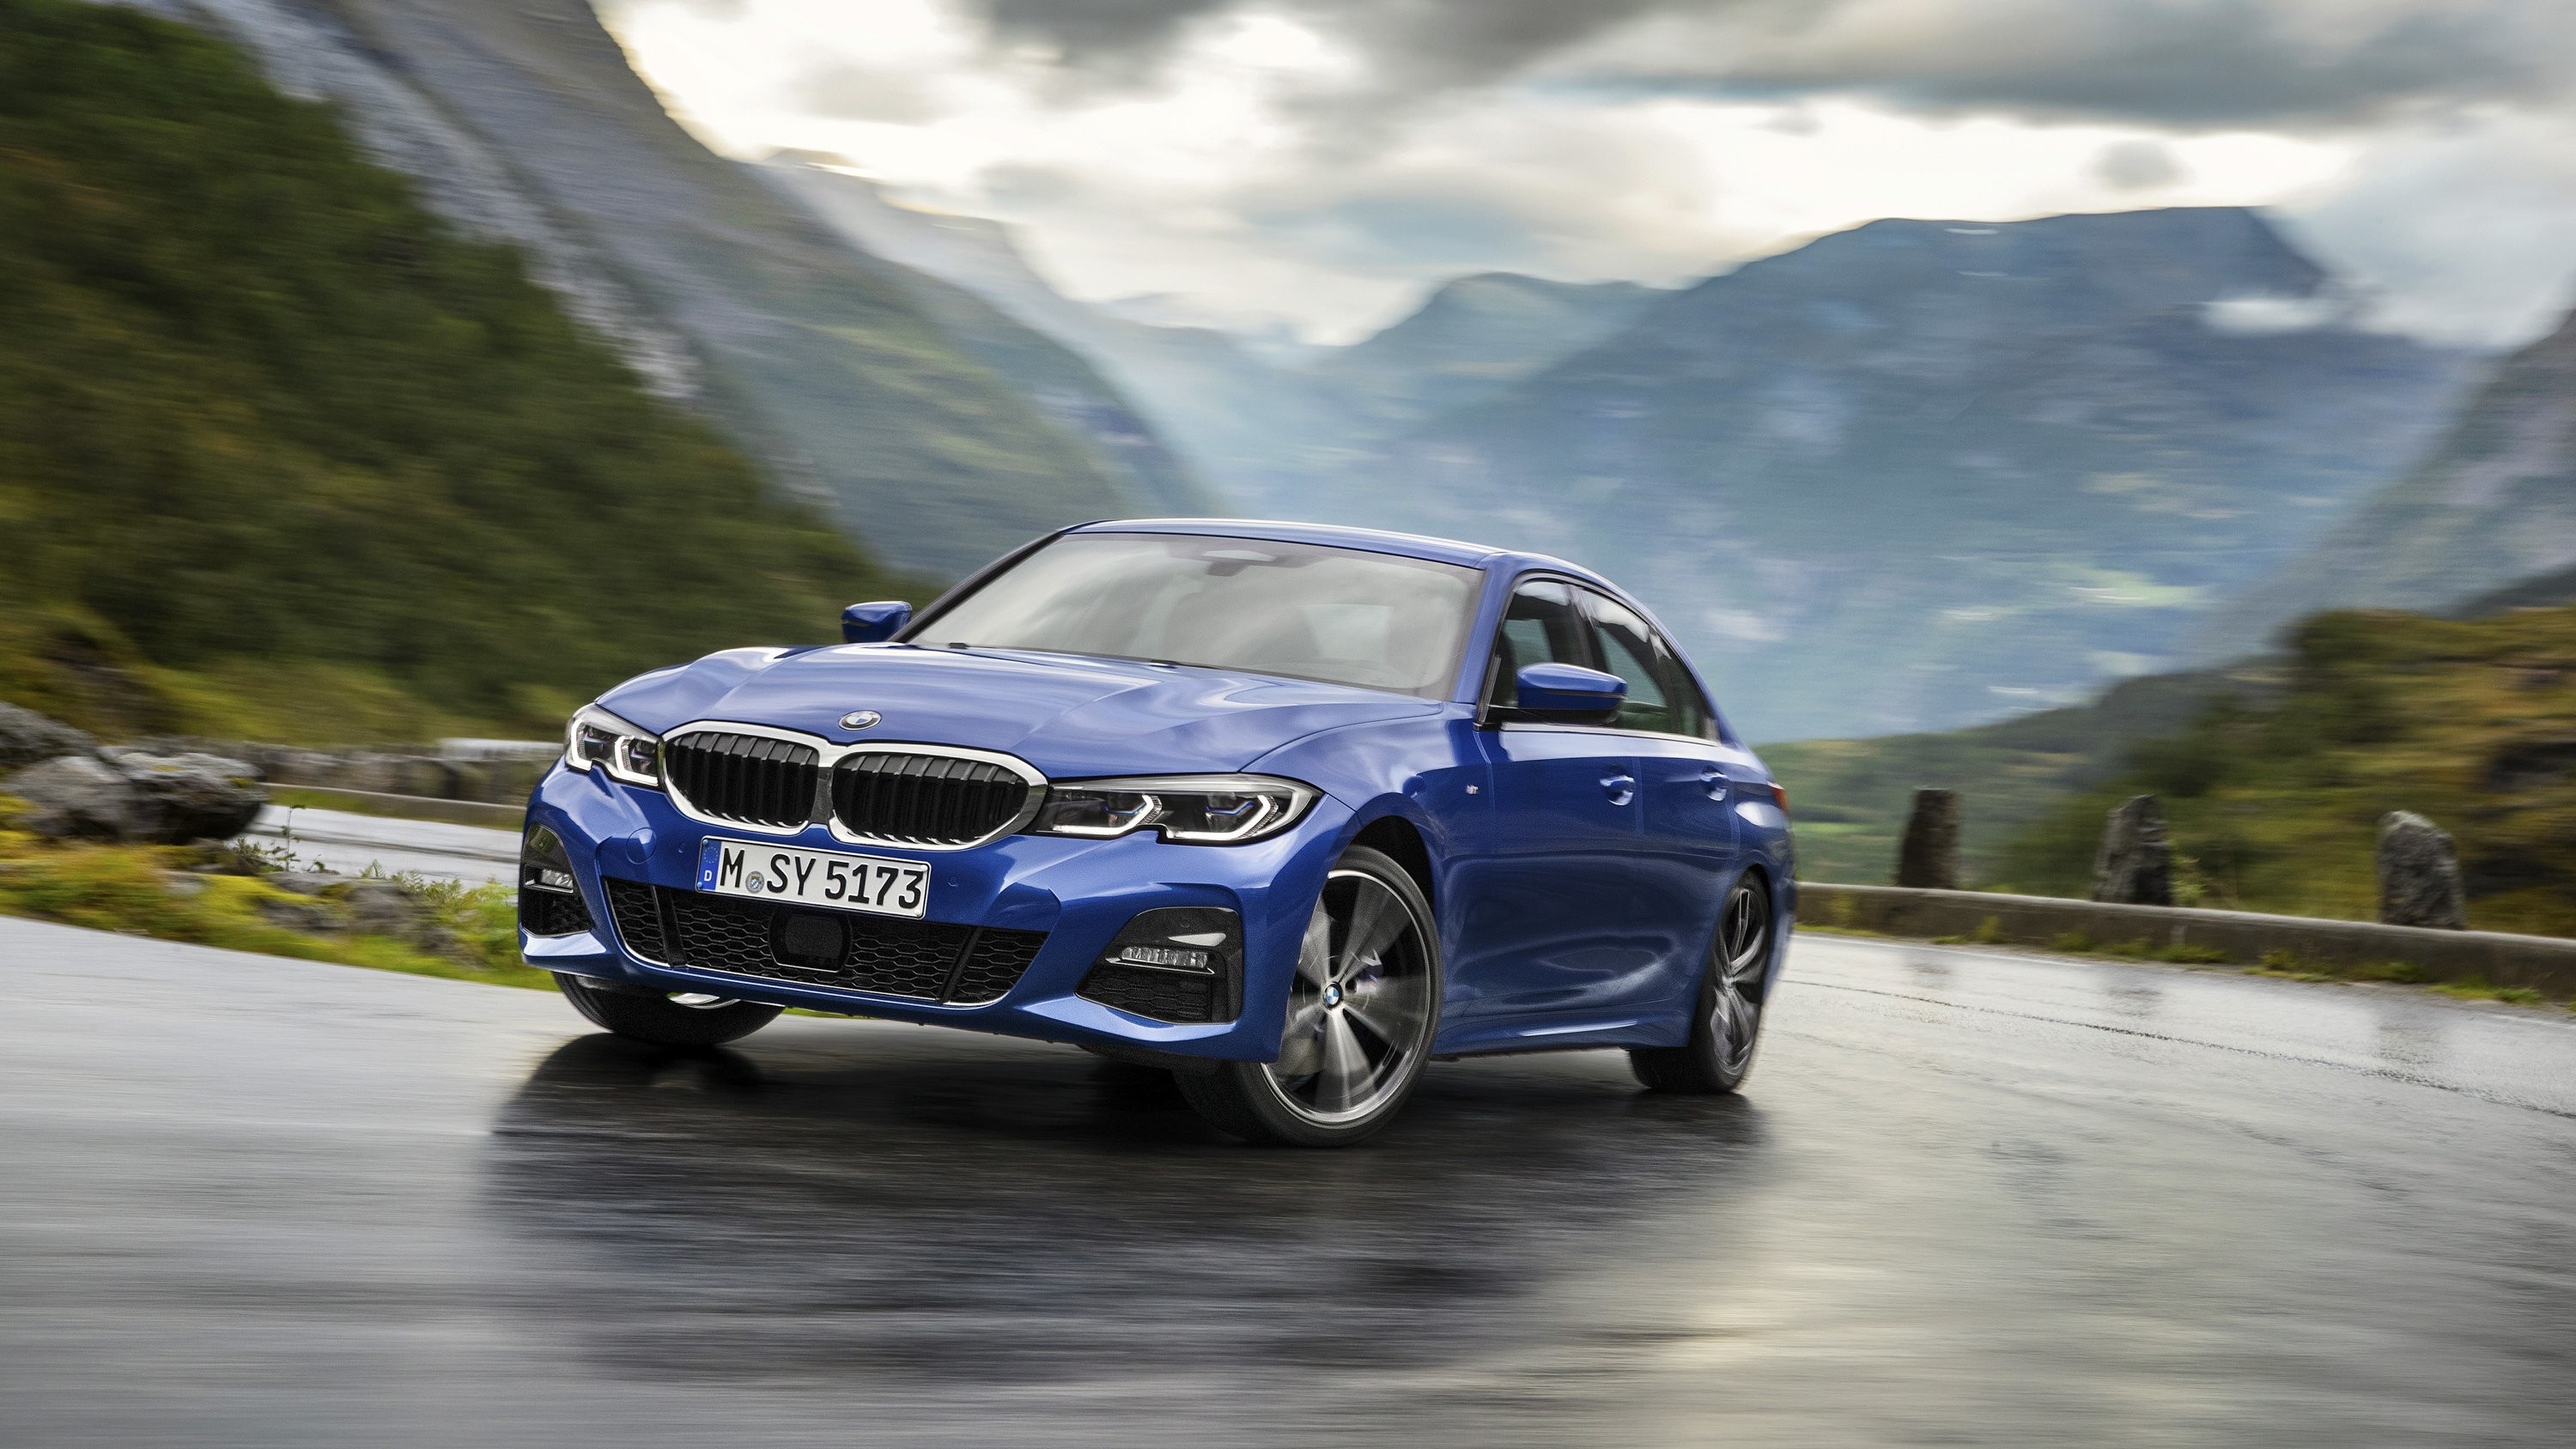 3000x1688 2019 BMW 3 Series Pictures, Photos, Wallpapers.